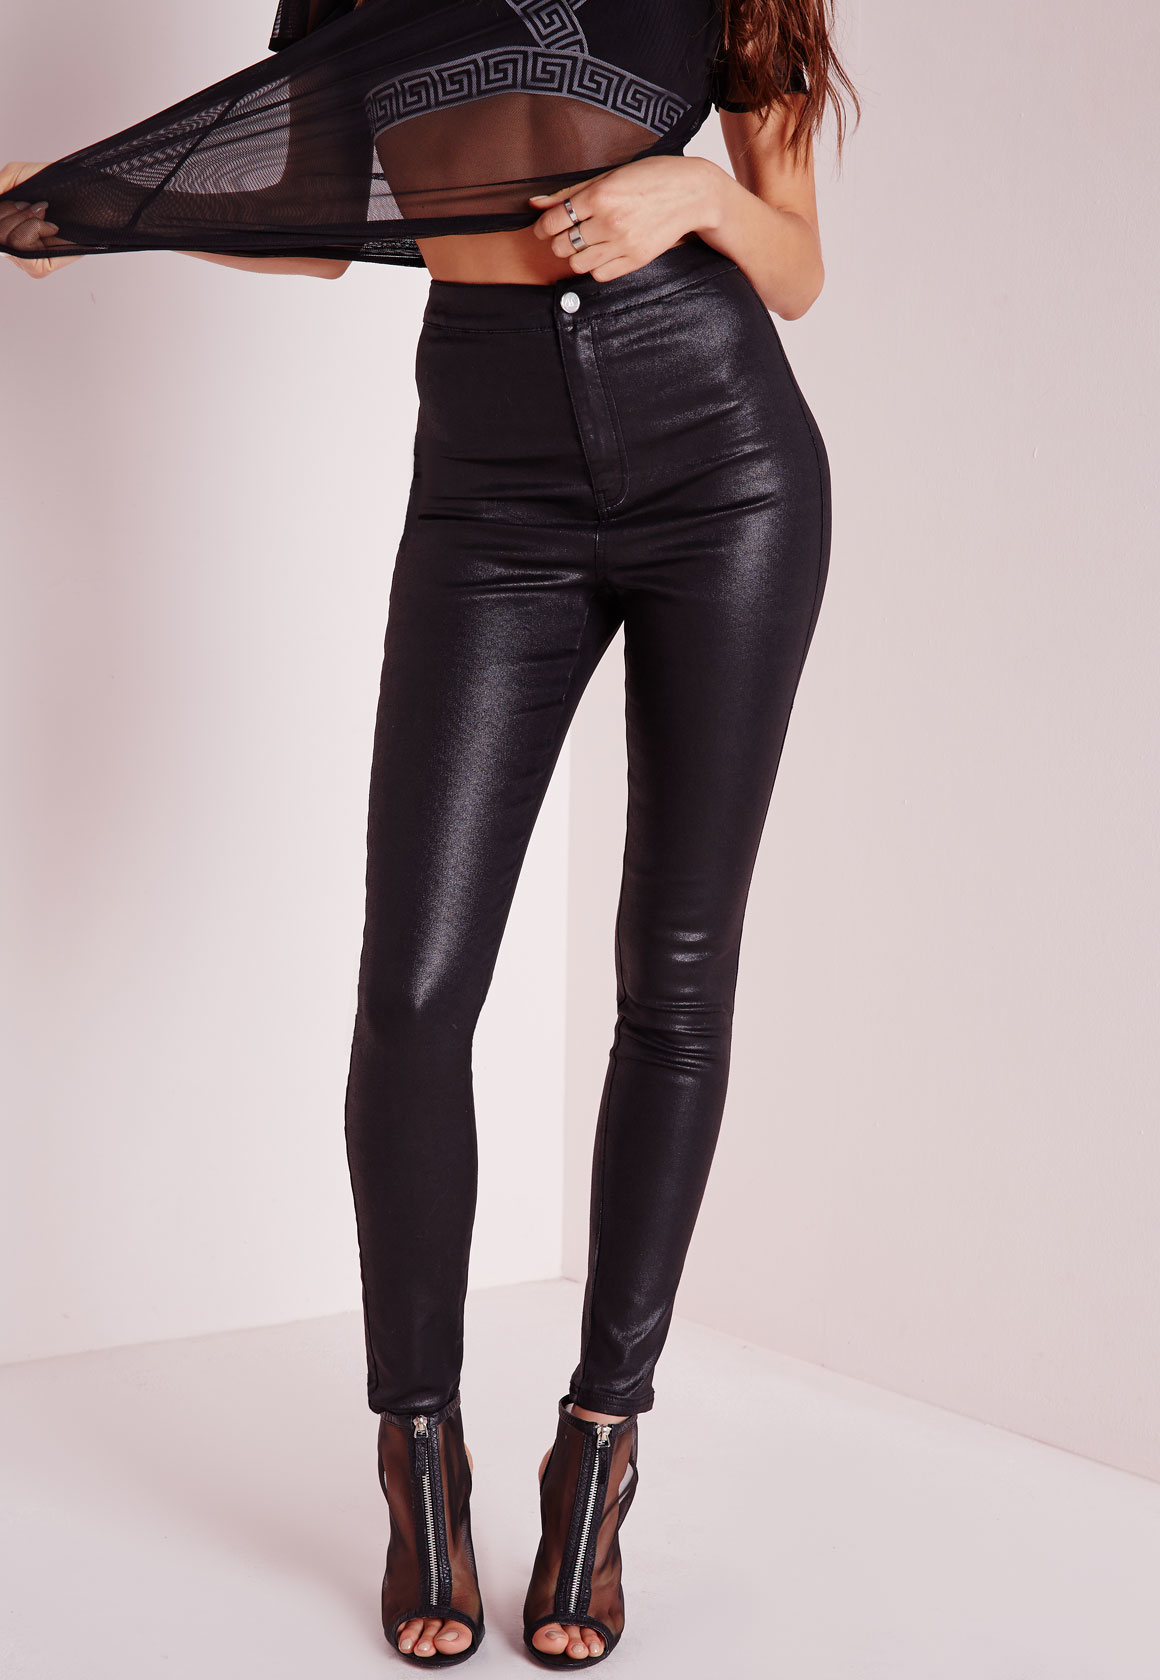 Lyst - Missguided Vice Super Stretch High Waisted Skinny Jeans Coated